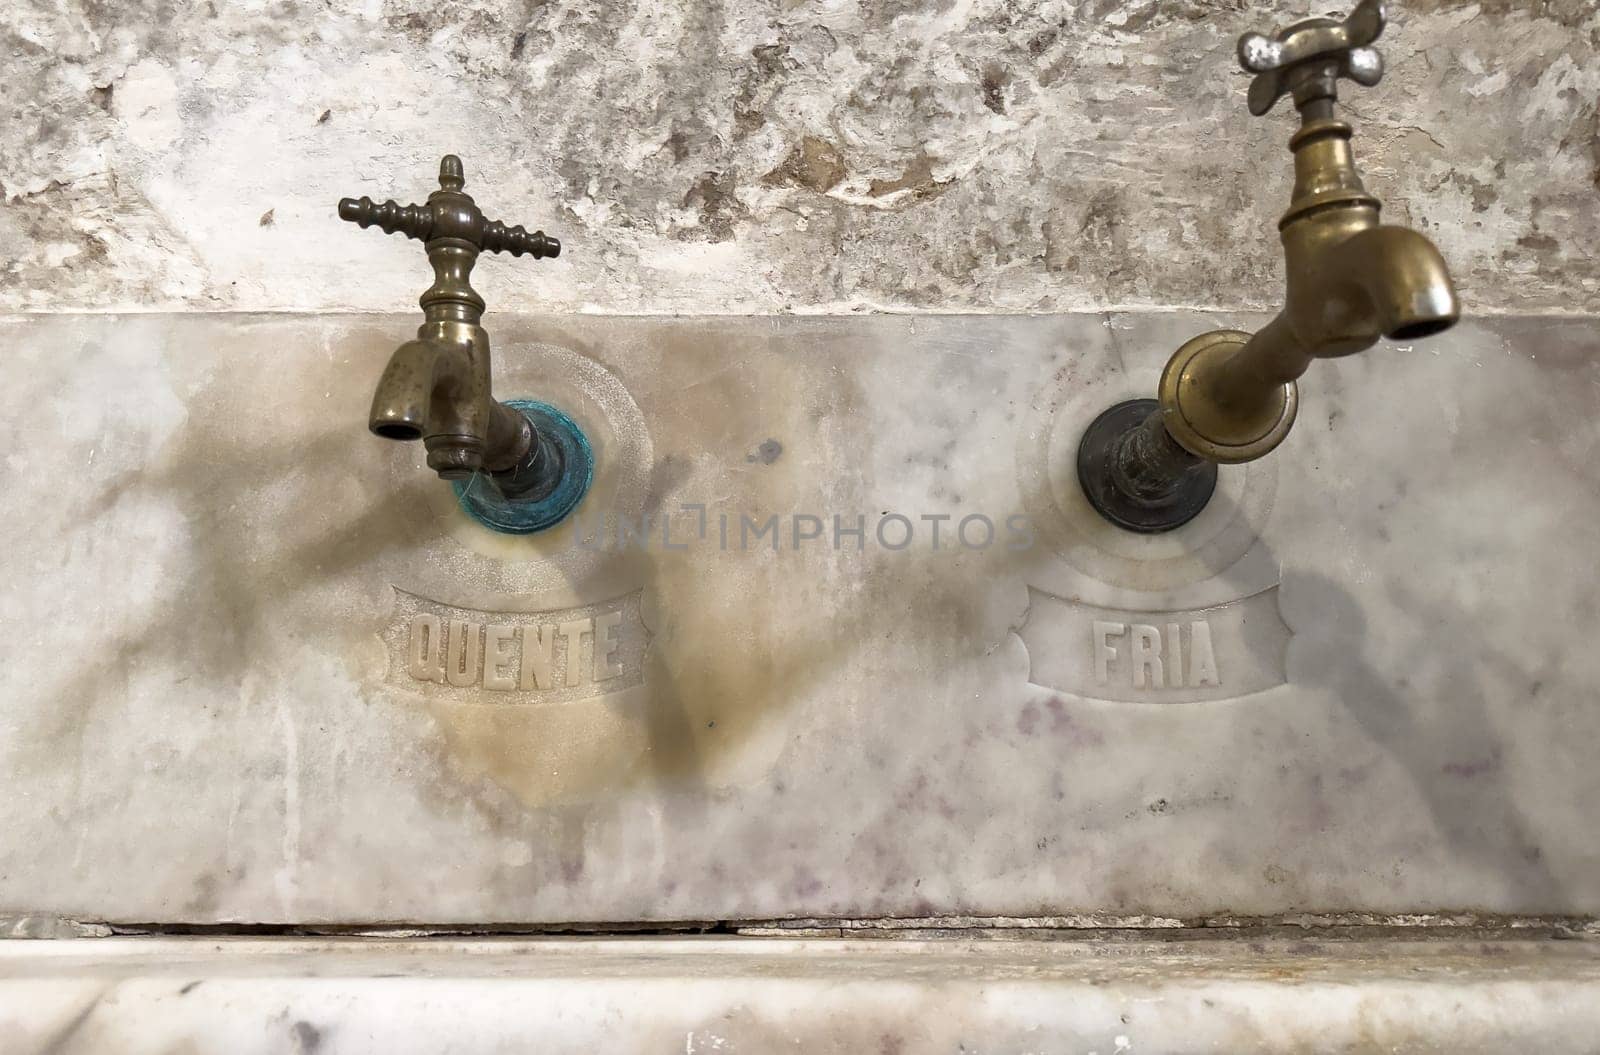 Vintage brass faucets marked QUENTE (hot) and FRIA (cold) on an old marble sink.